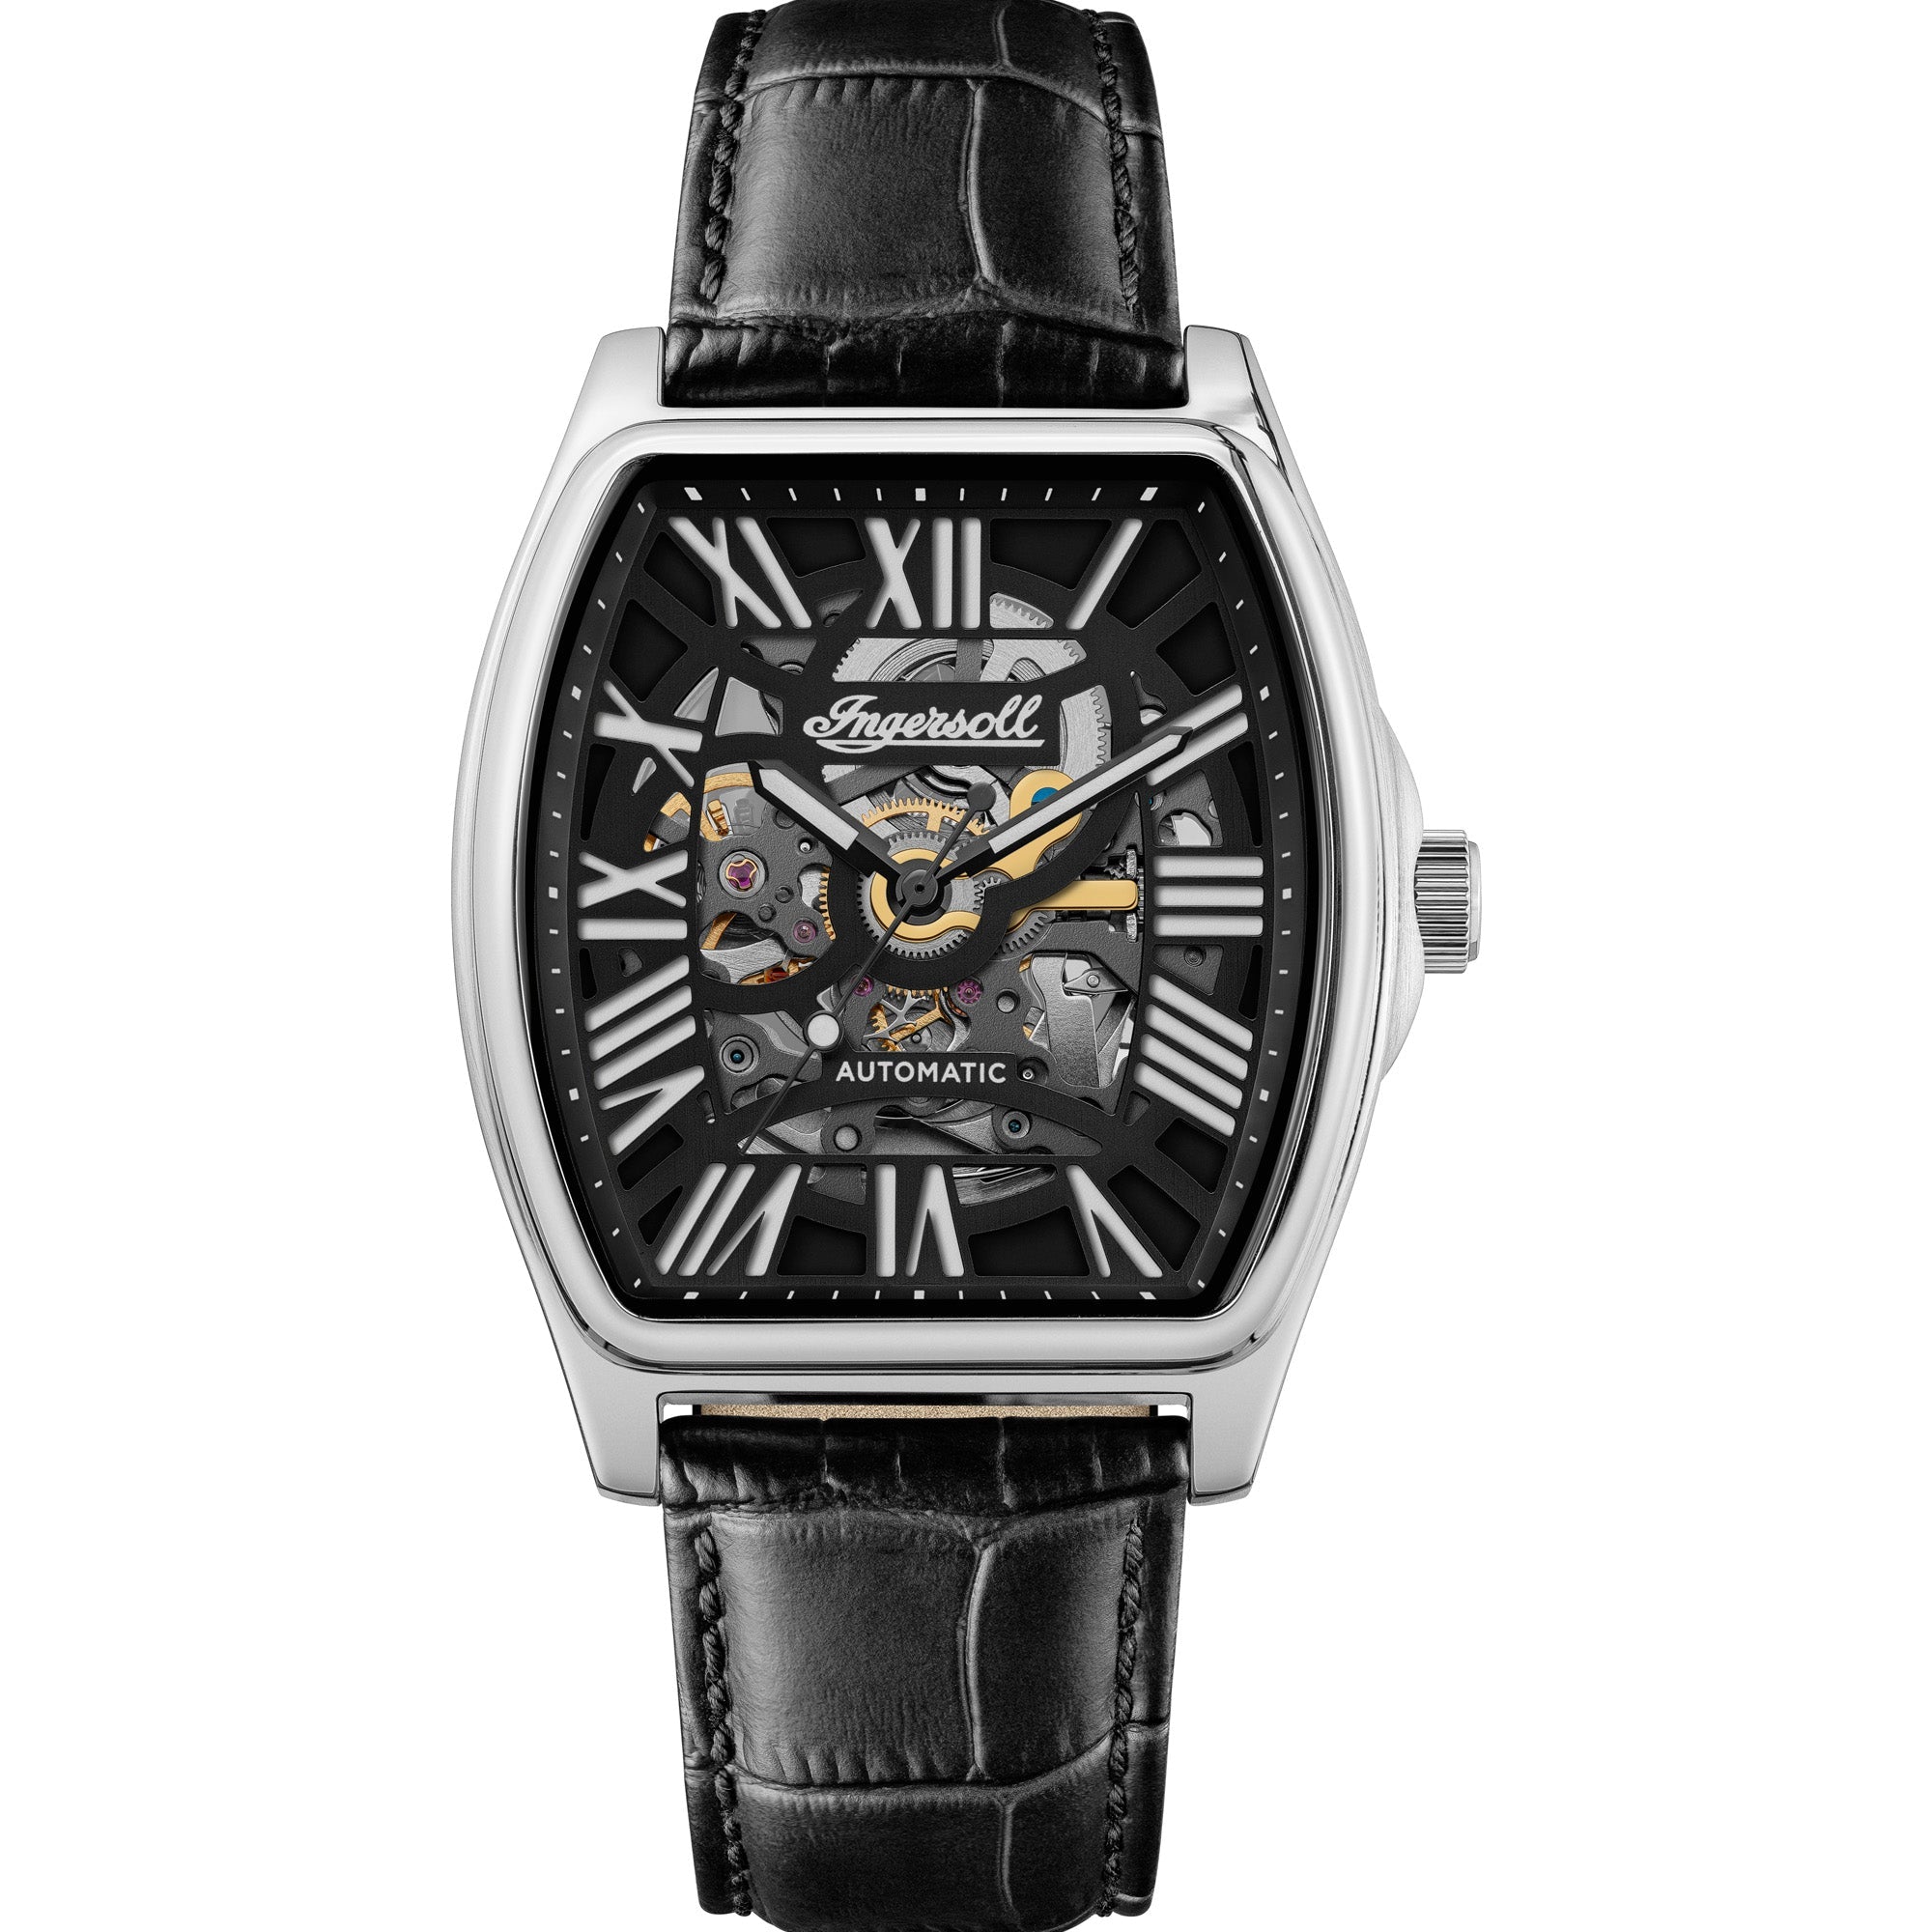 The California Automatic Black Leather Strap Watch